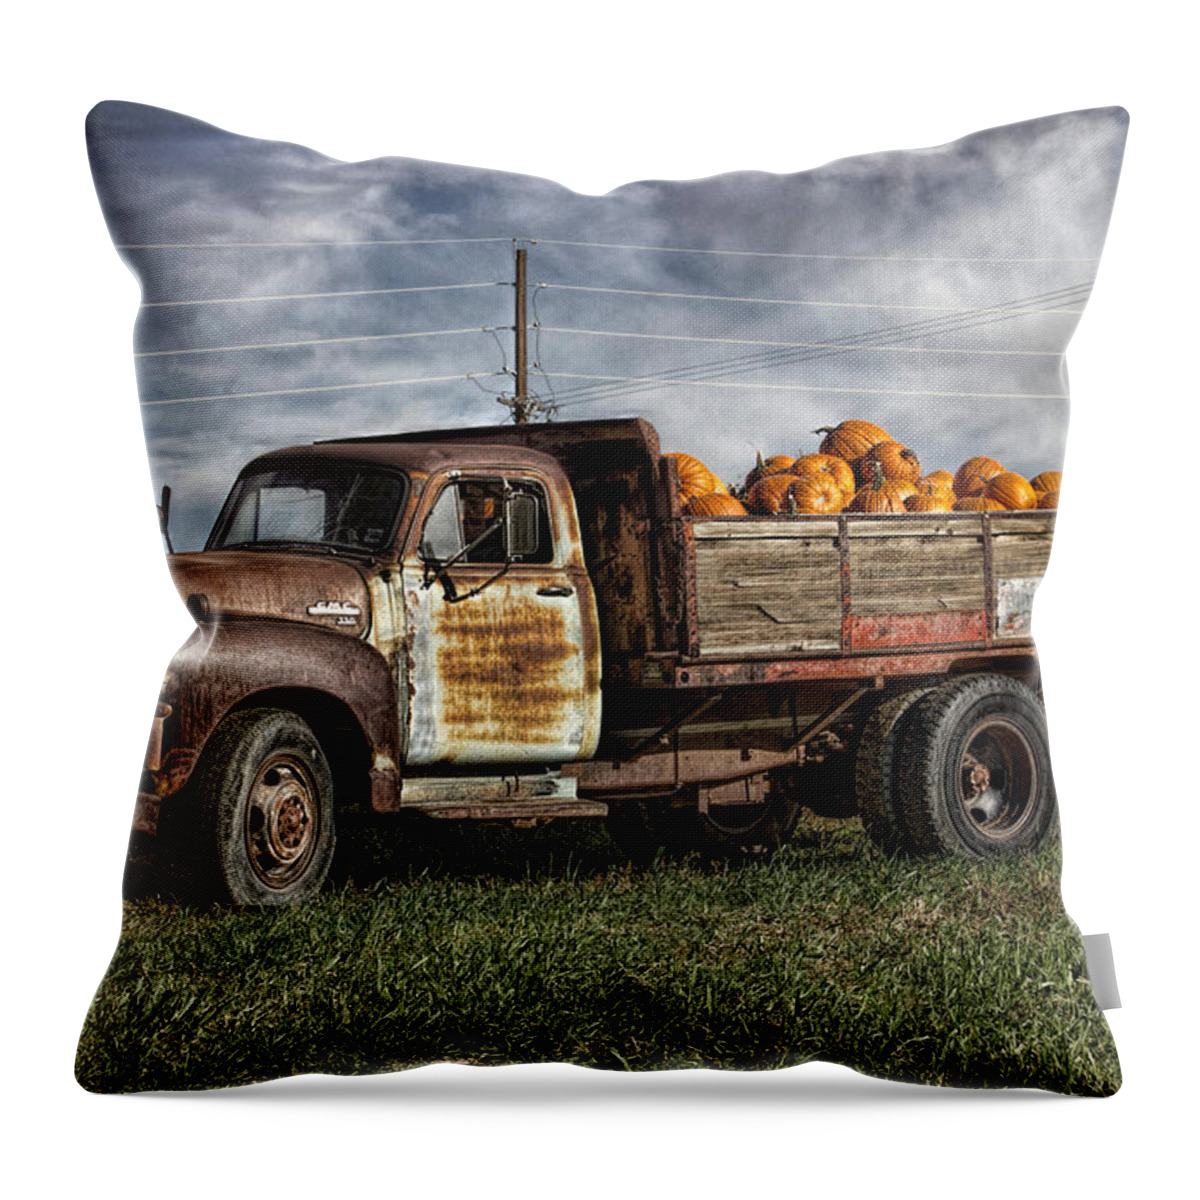 Harvest Throw Pillow featuring the photograph Chromatic Shipment by Becca Buecher